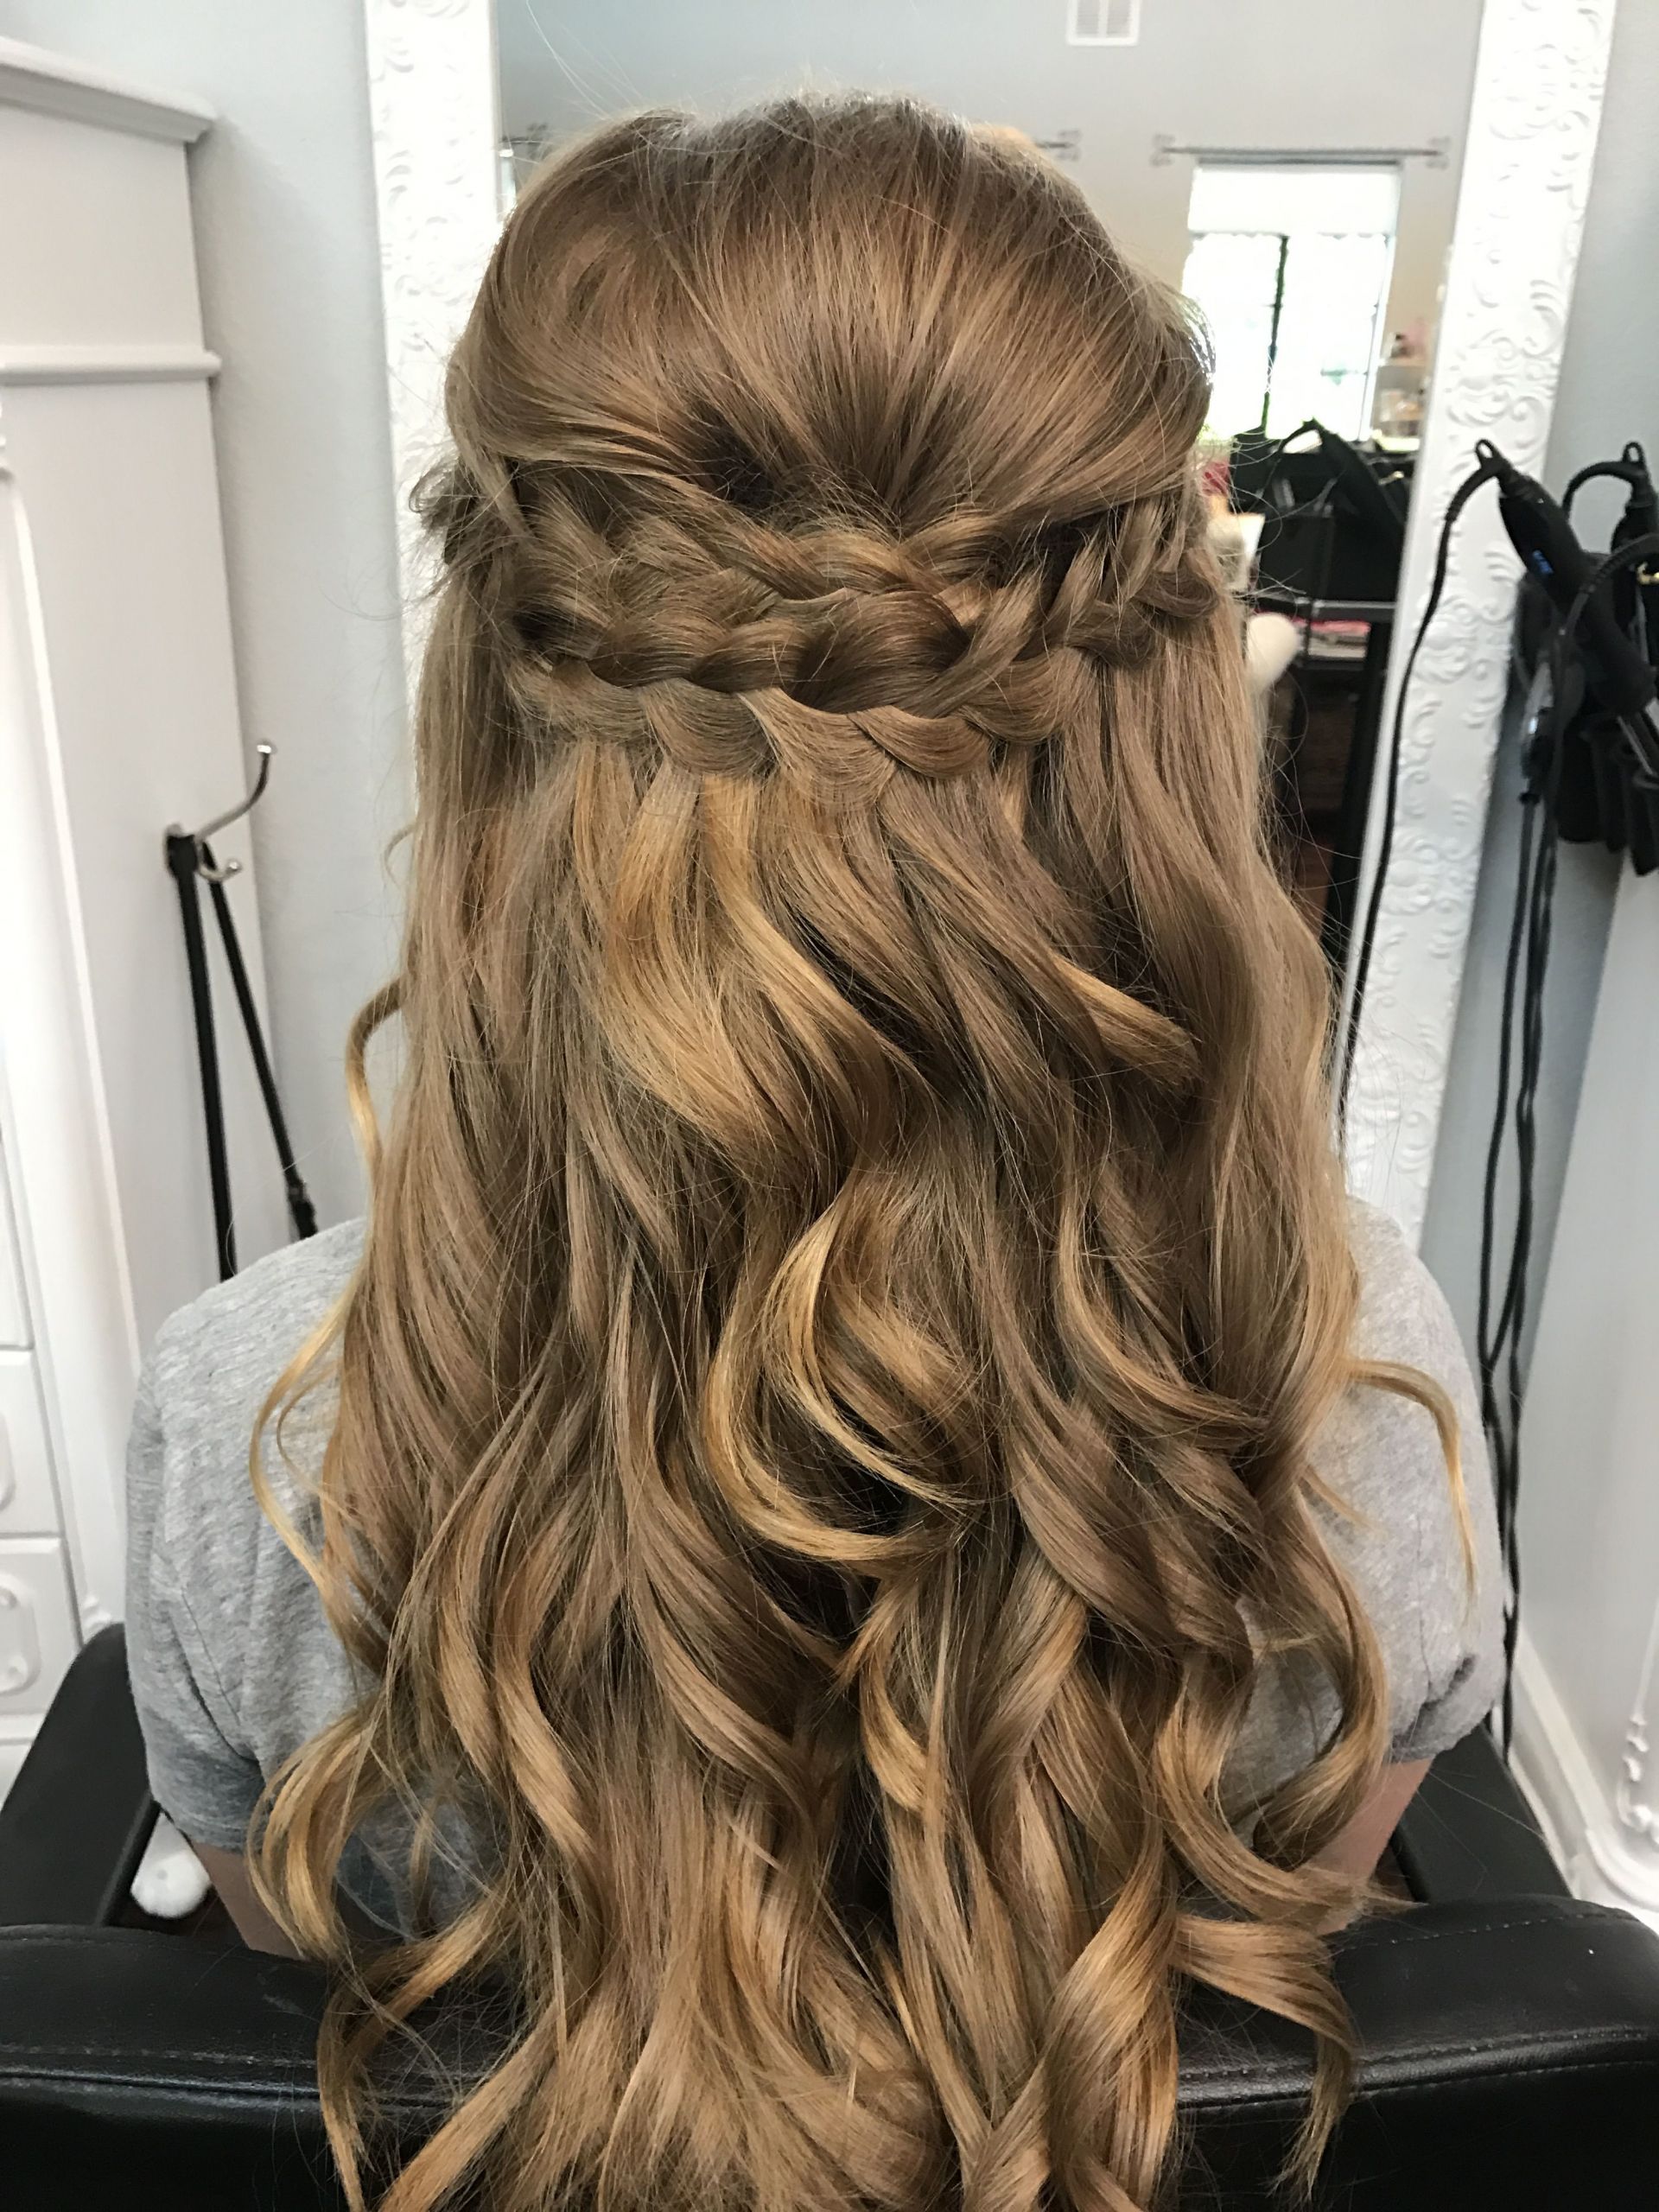 Half Up And Half Down Hairstyles For Prom
 Braided half up half down prom hair